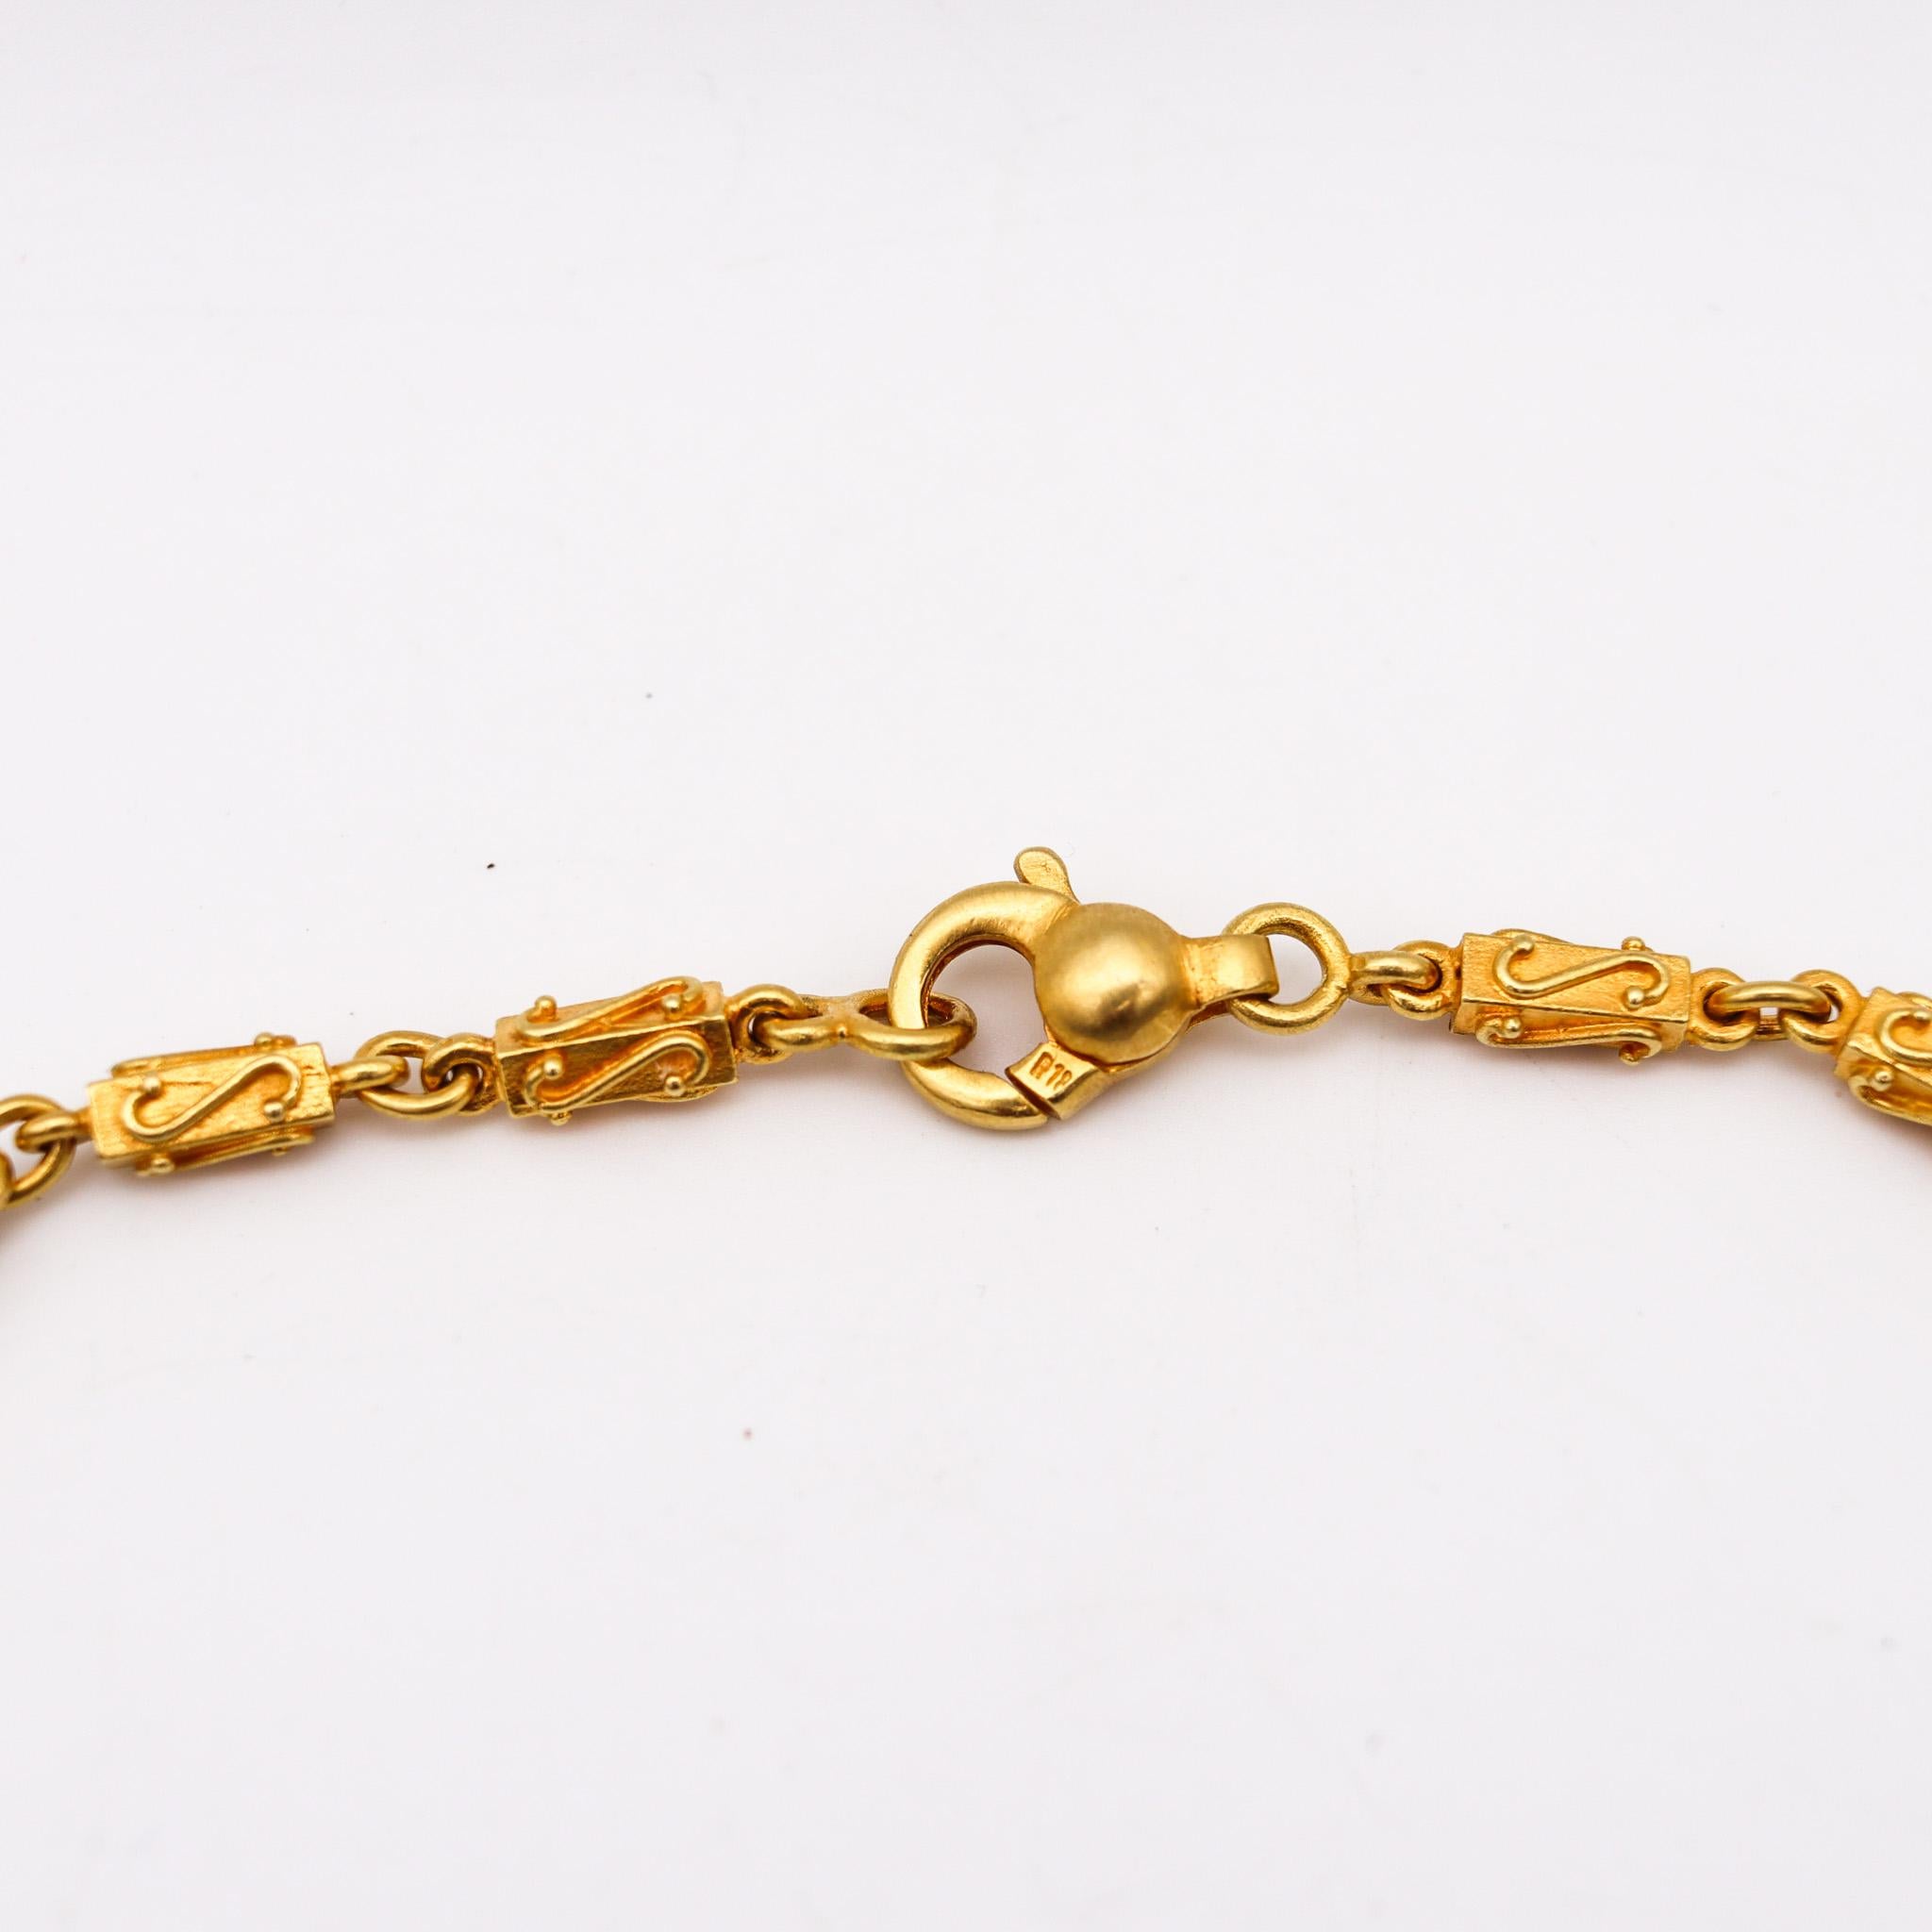 Etruscan Revival Vintage Italian Bold Chain Necklace in Solid 18Kt Yellow Gold In Excellent Condition For Sale In Miami, FL